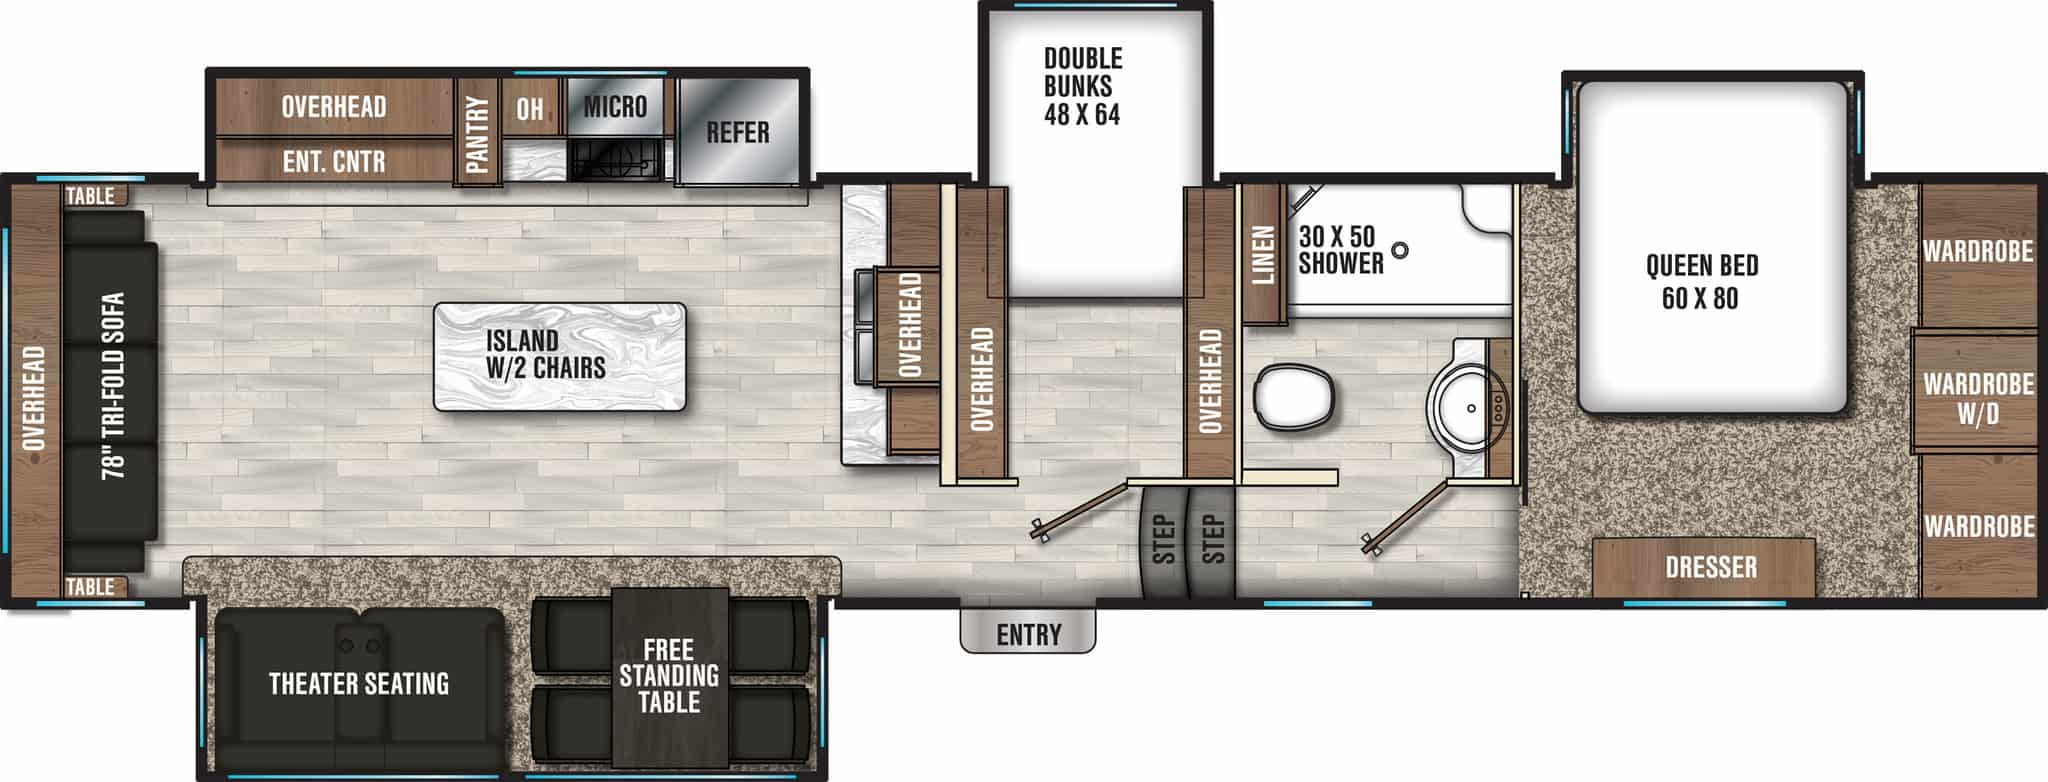 Our Favorite Fifth Wheel Floor Plans with 2 Bedrooms - Camper Report 5th Wheel Floor Plans With 2 Bedrooms